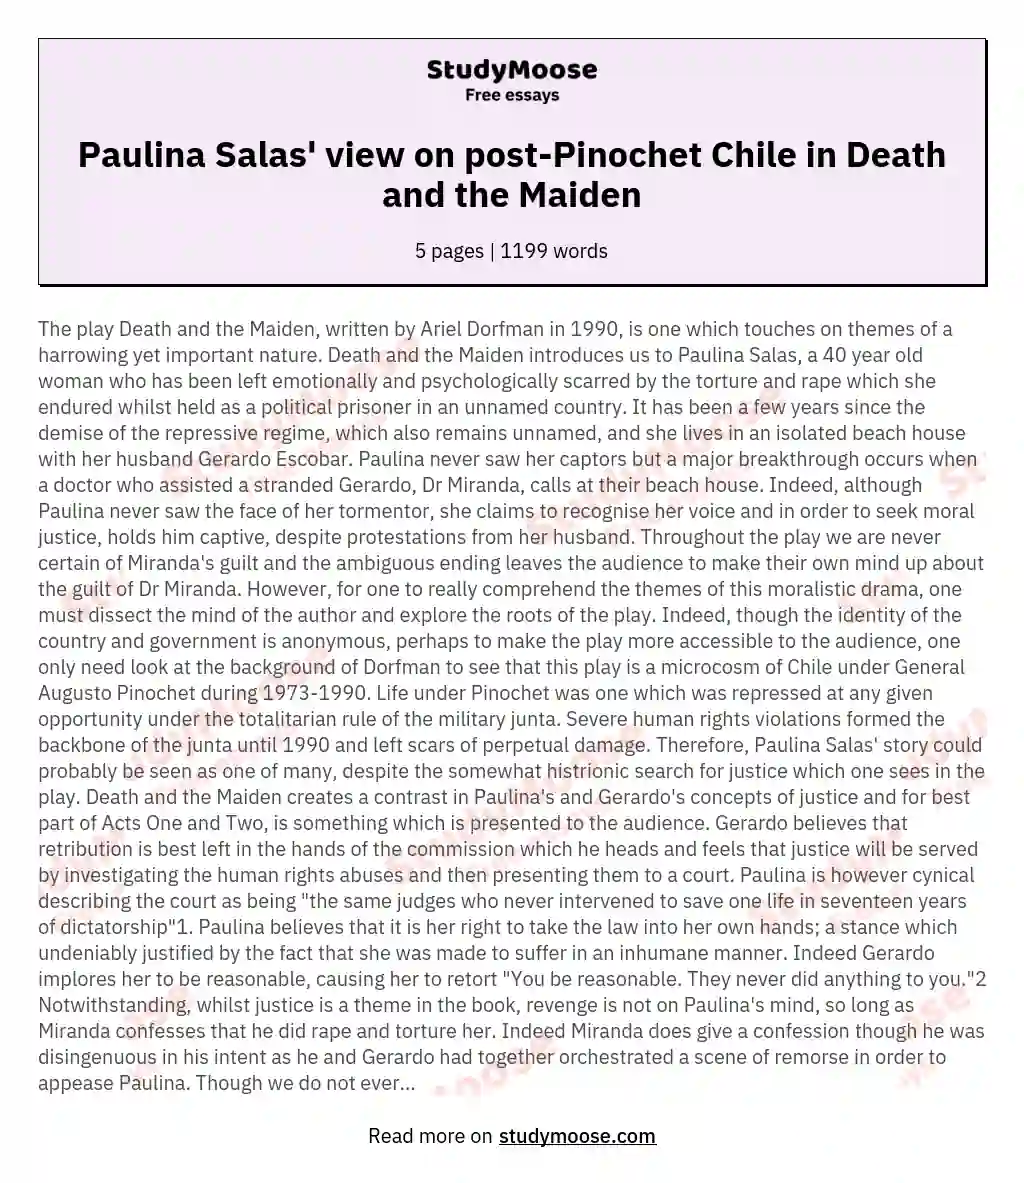 How is life after Pinochet and Chile's military government reflected through the eyes of Paulina Salas in Death and the Maiden?